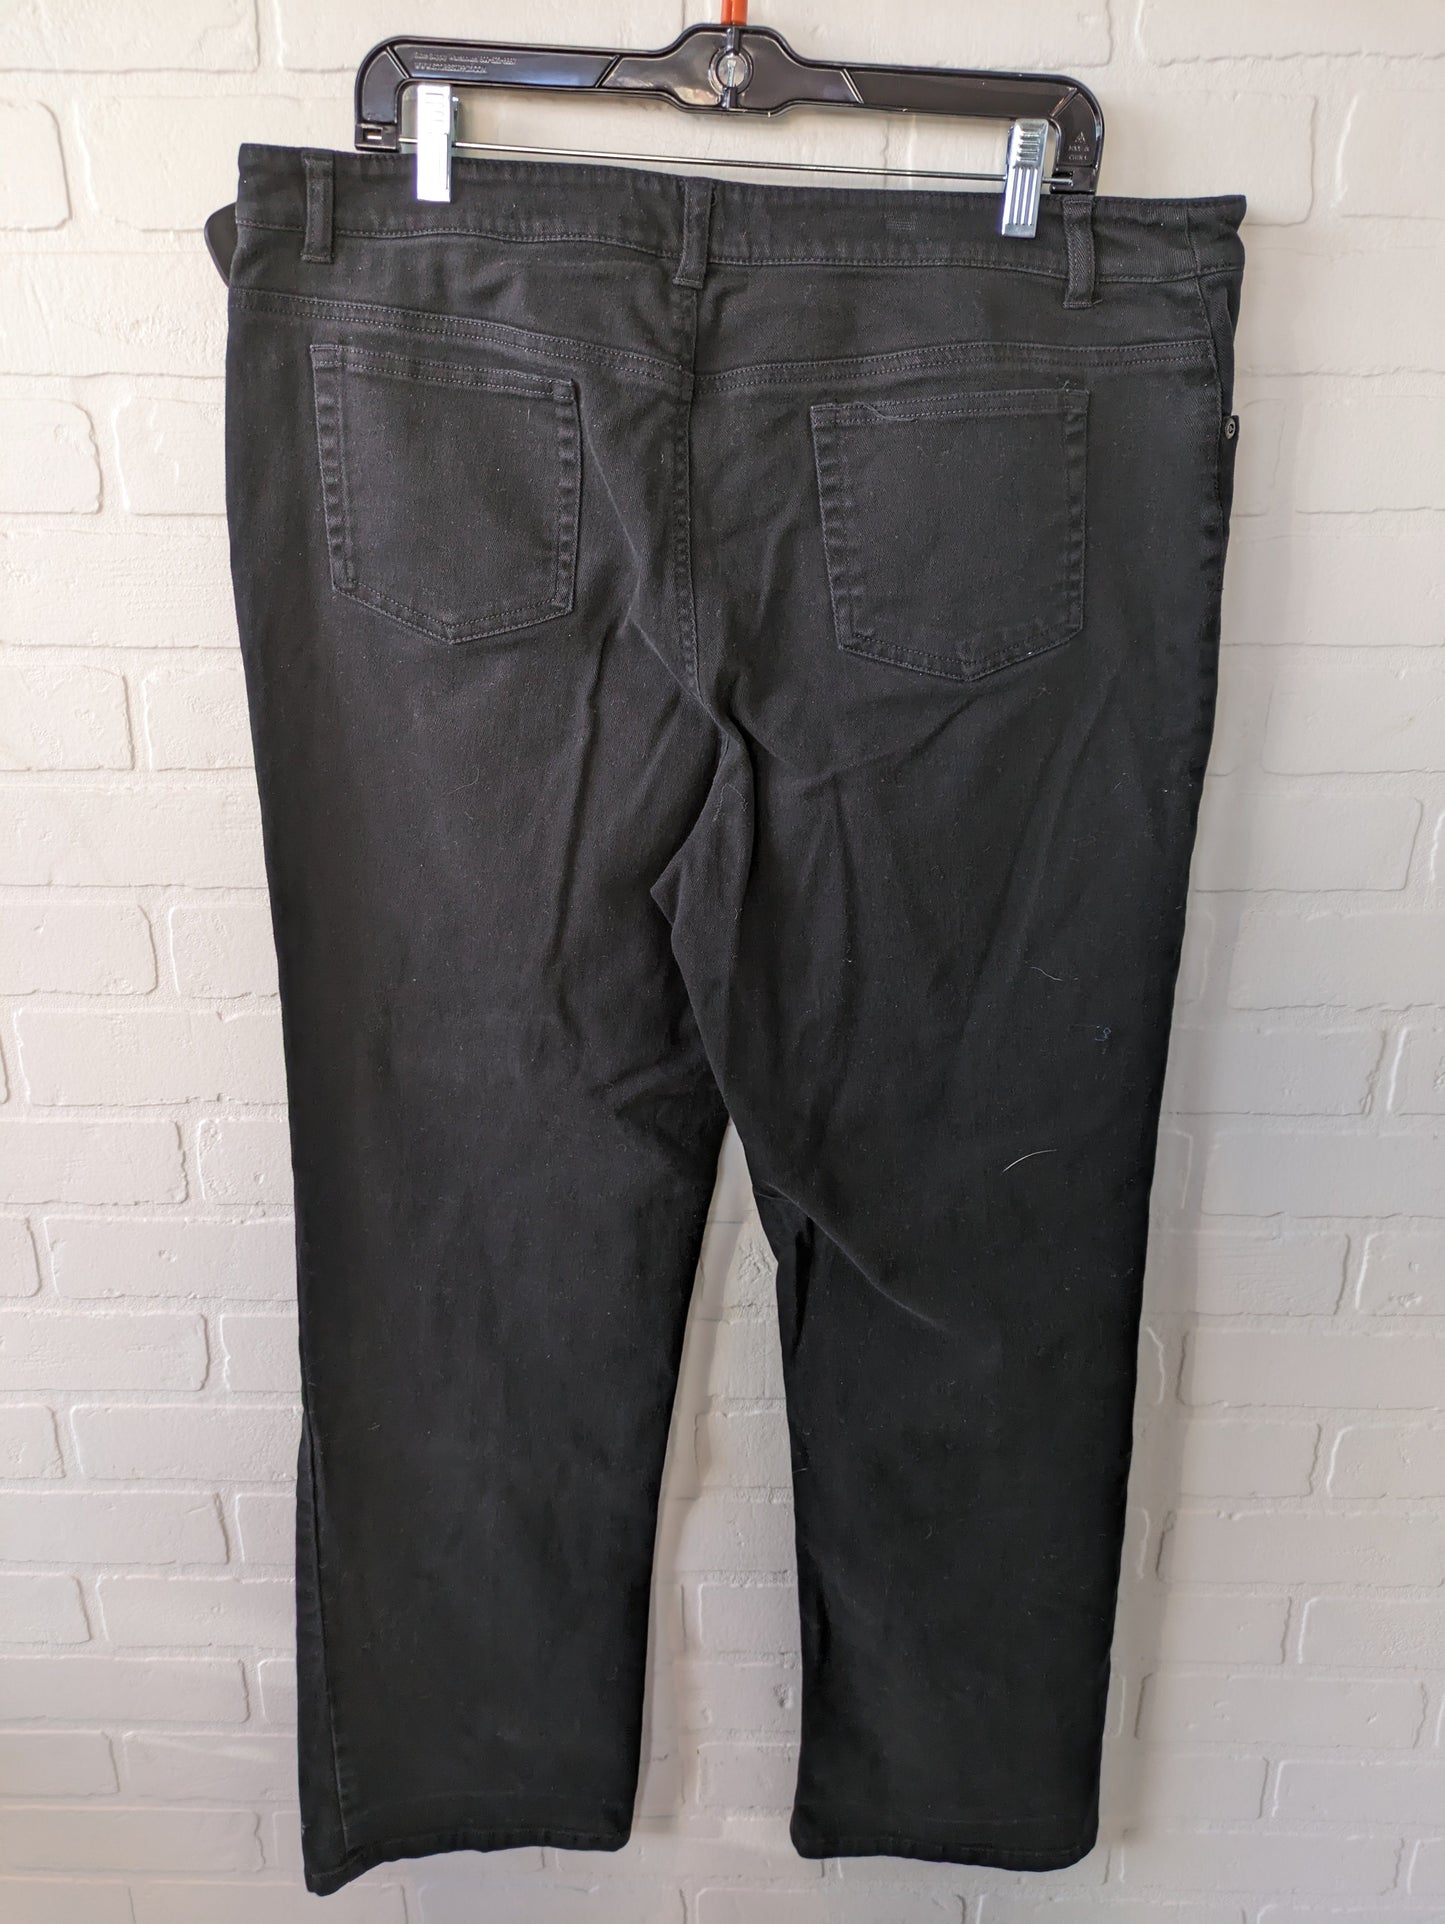 Jeans Straight By Jones New York  Size: 16